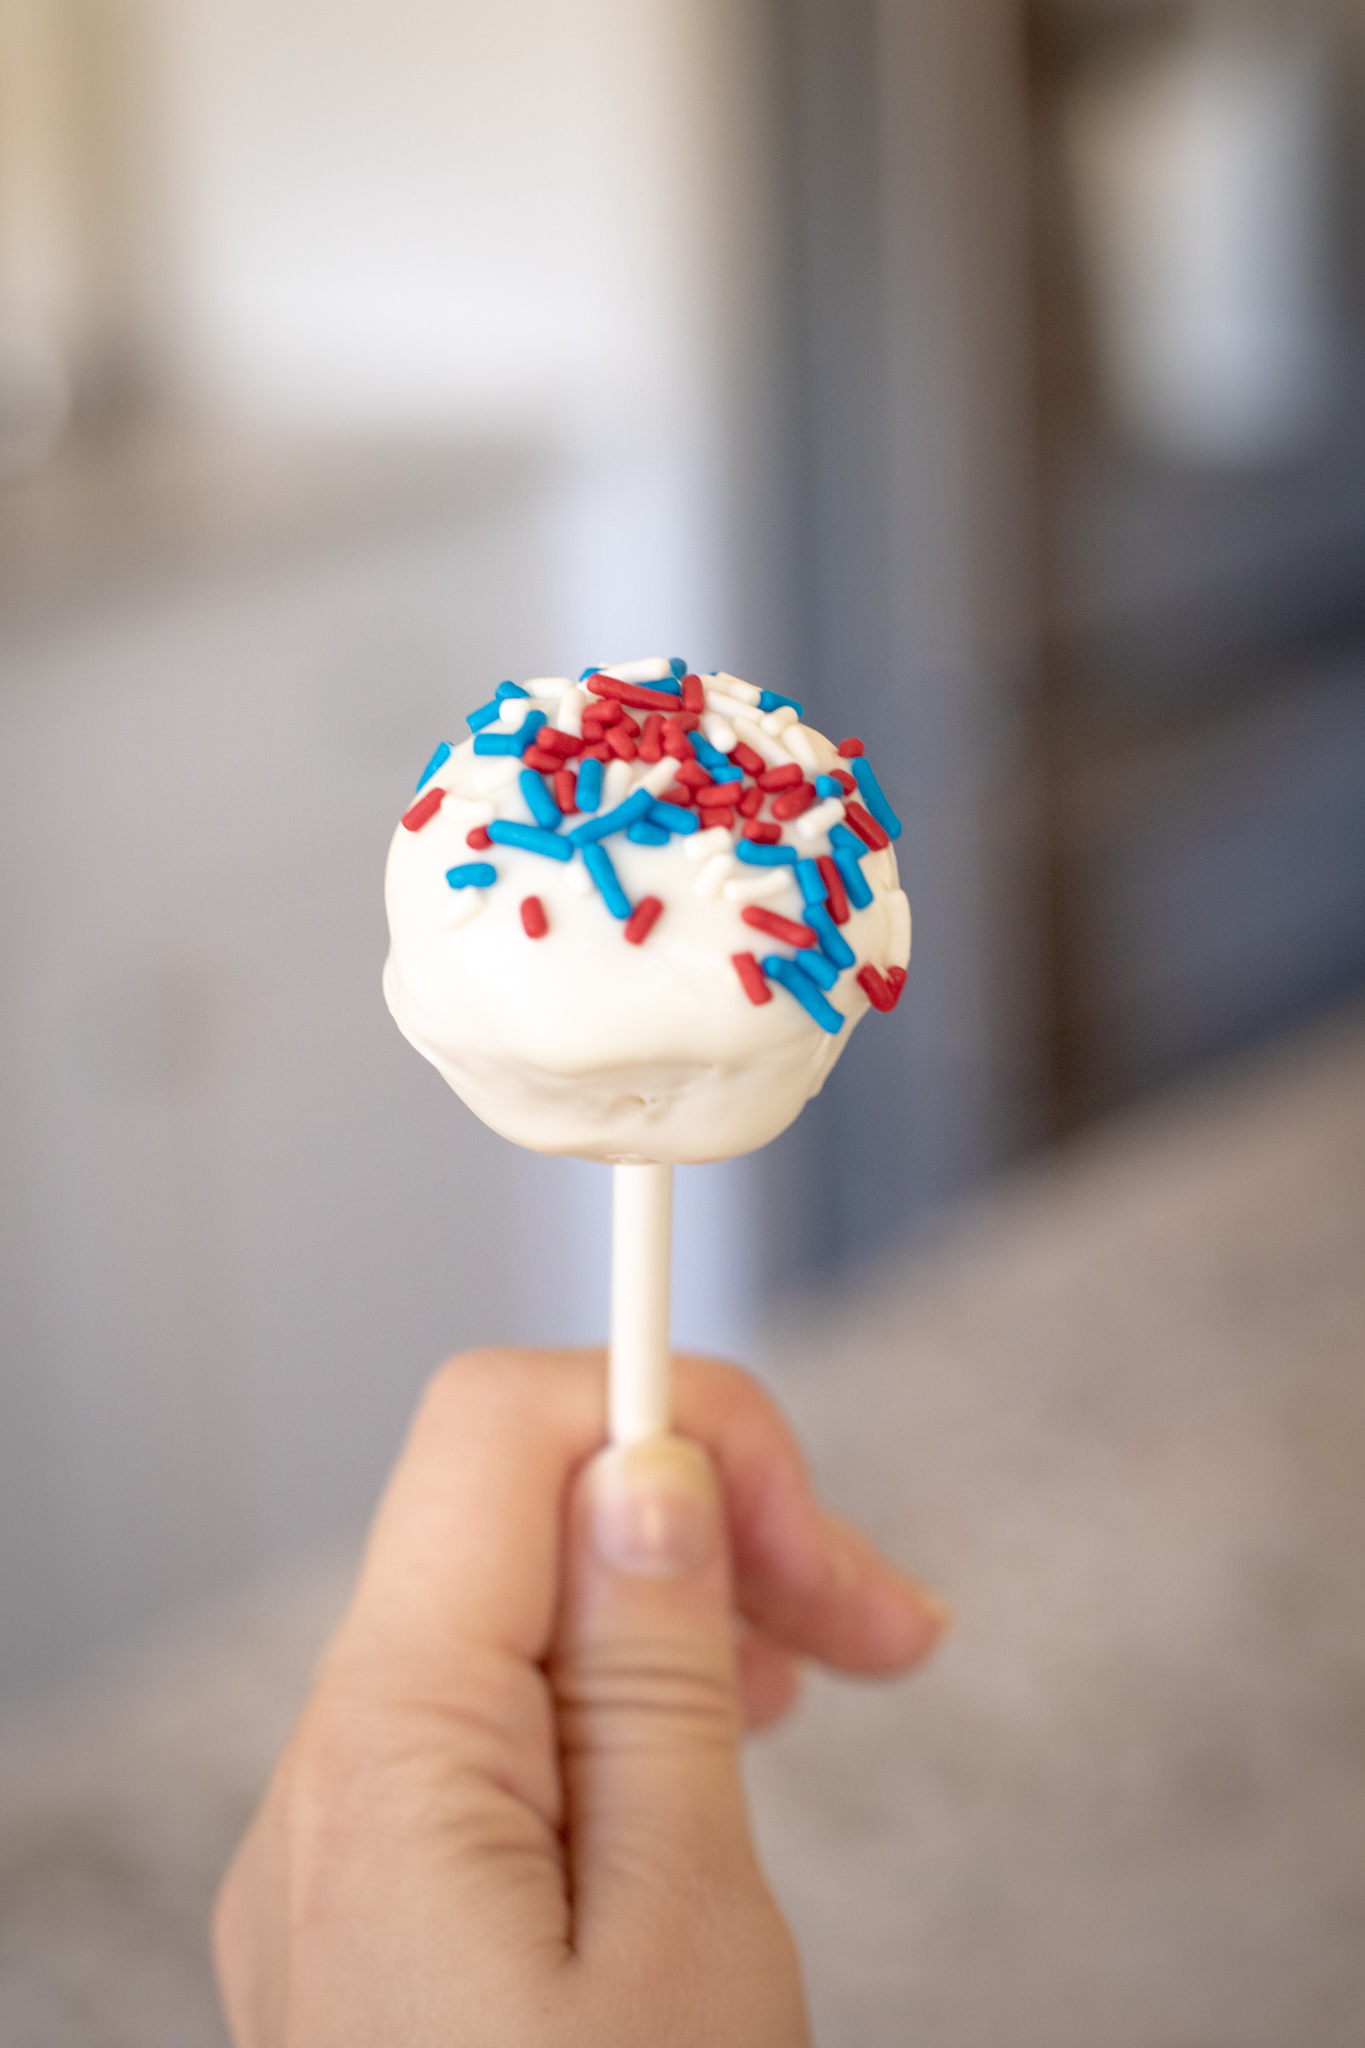 Someone holding a cake pop with red white and blue sprinkles on it.